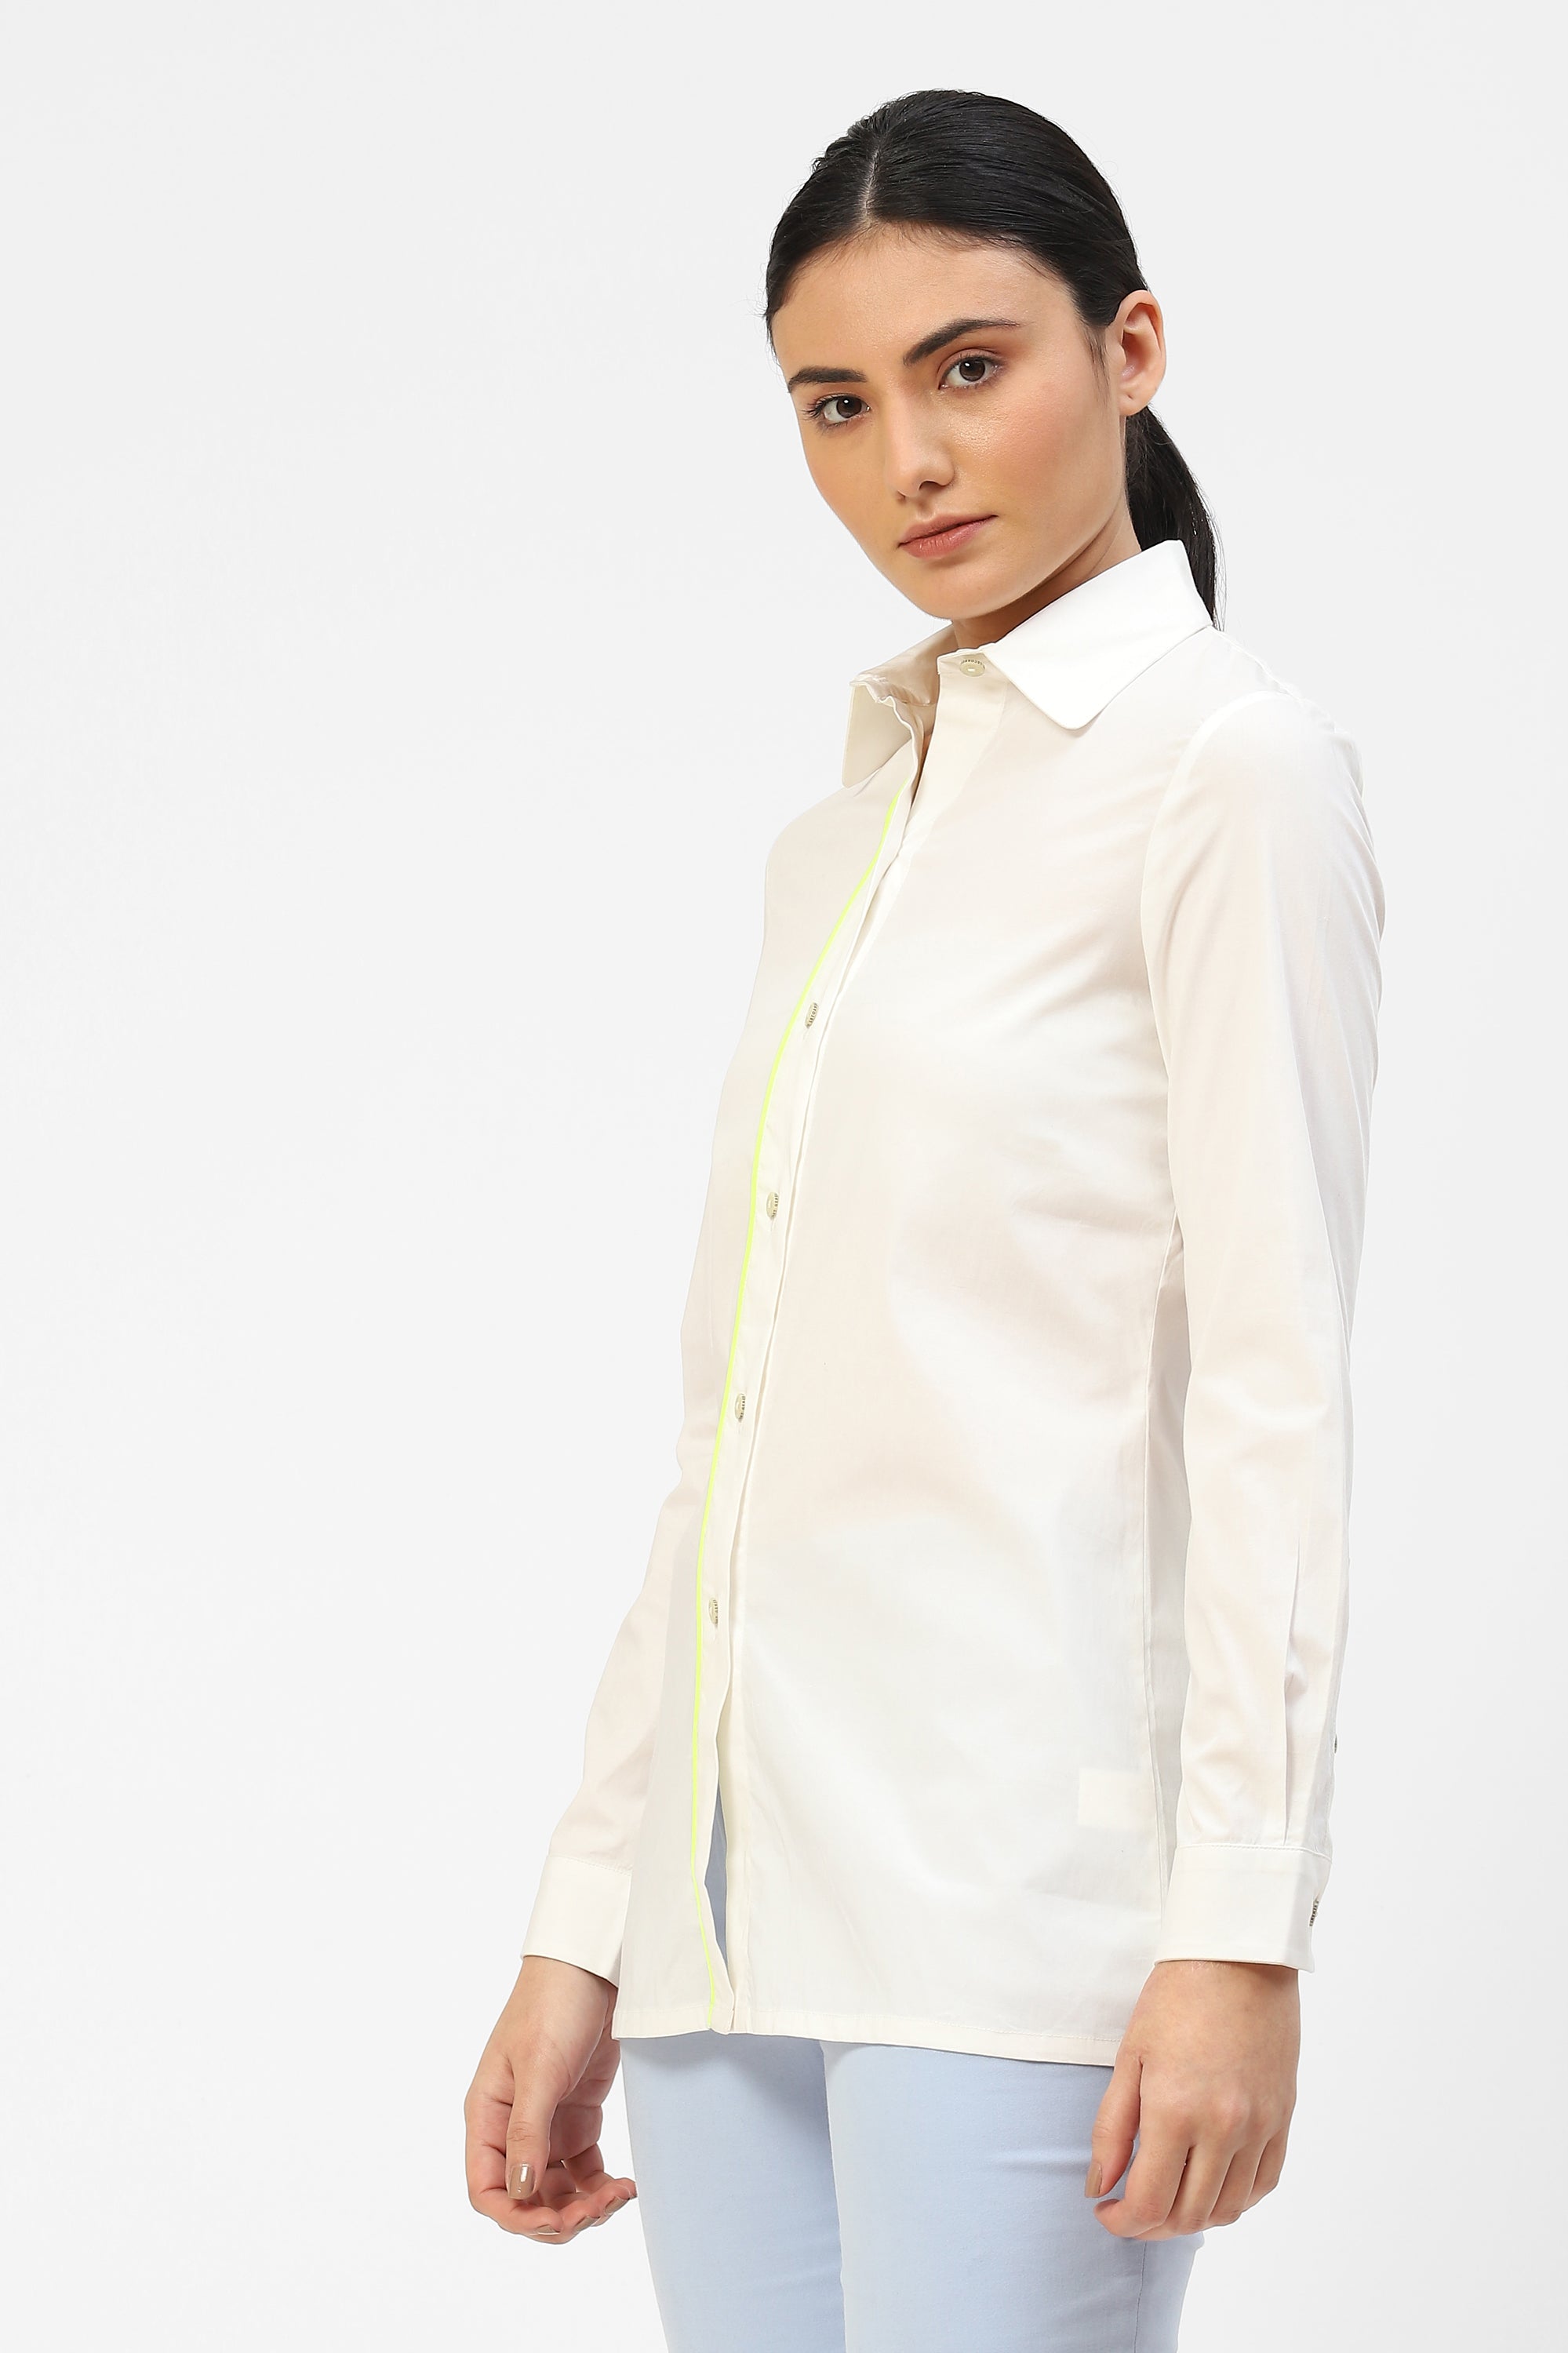 Womens Classic White Shirt with Lime Green Placket Piping